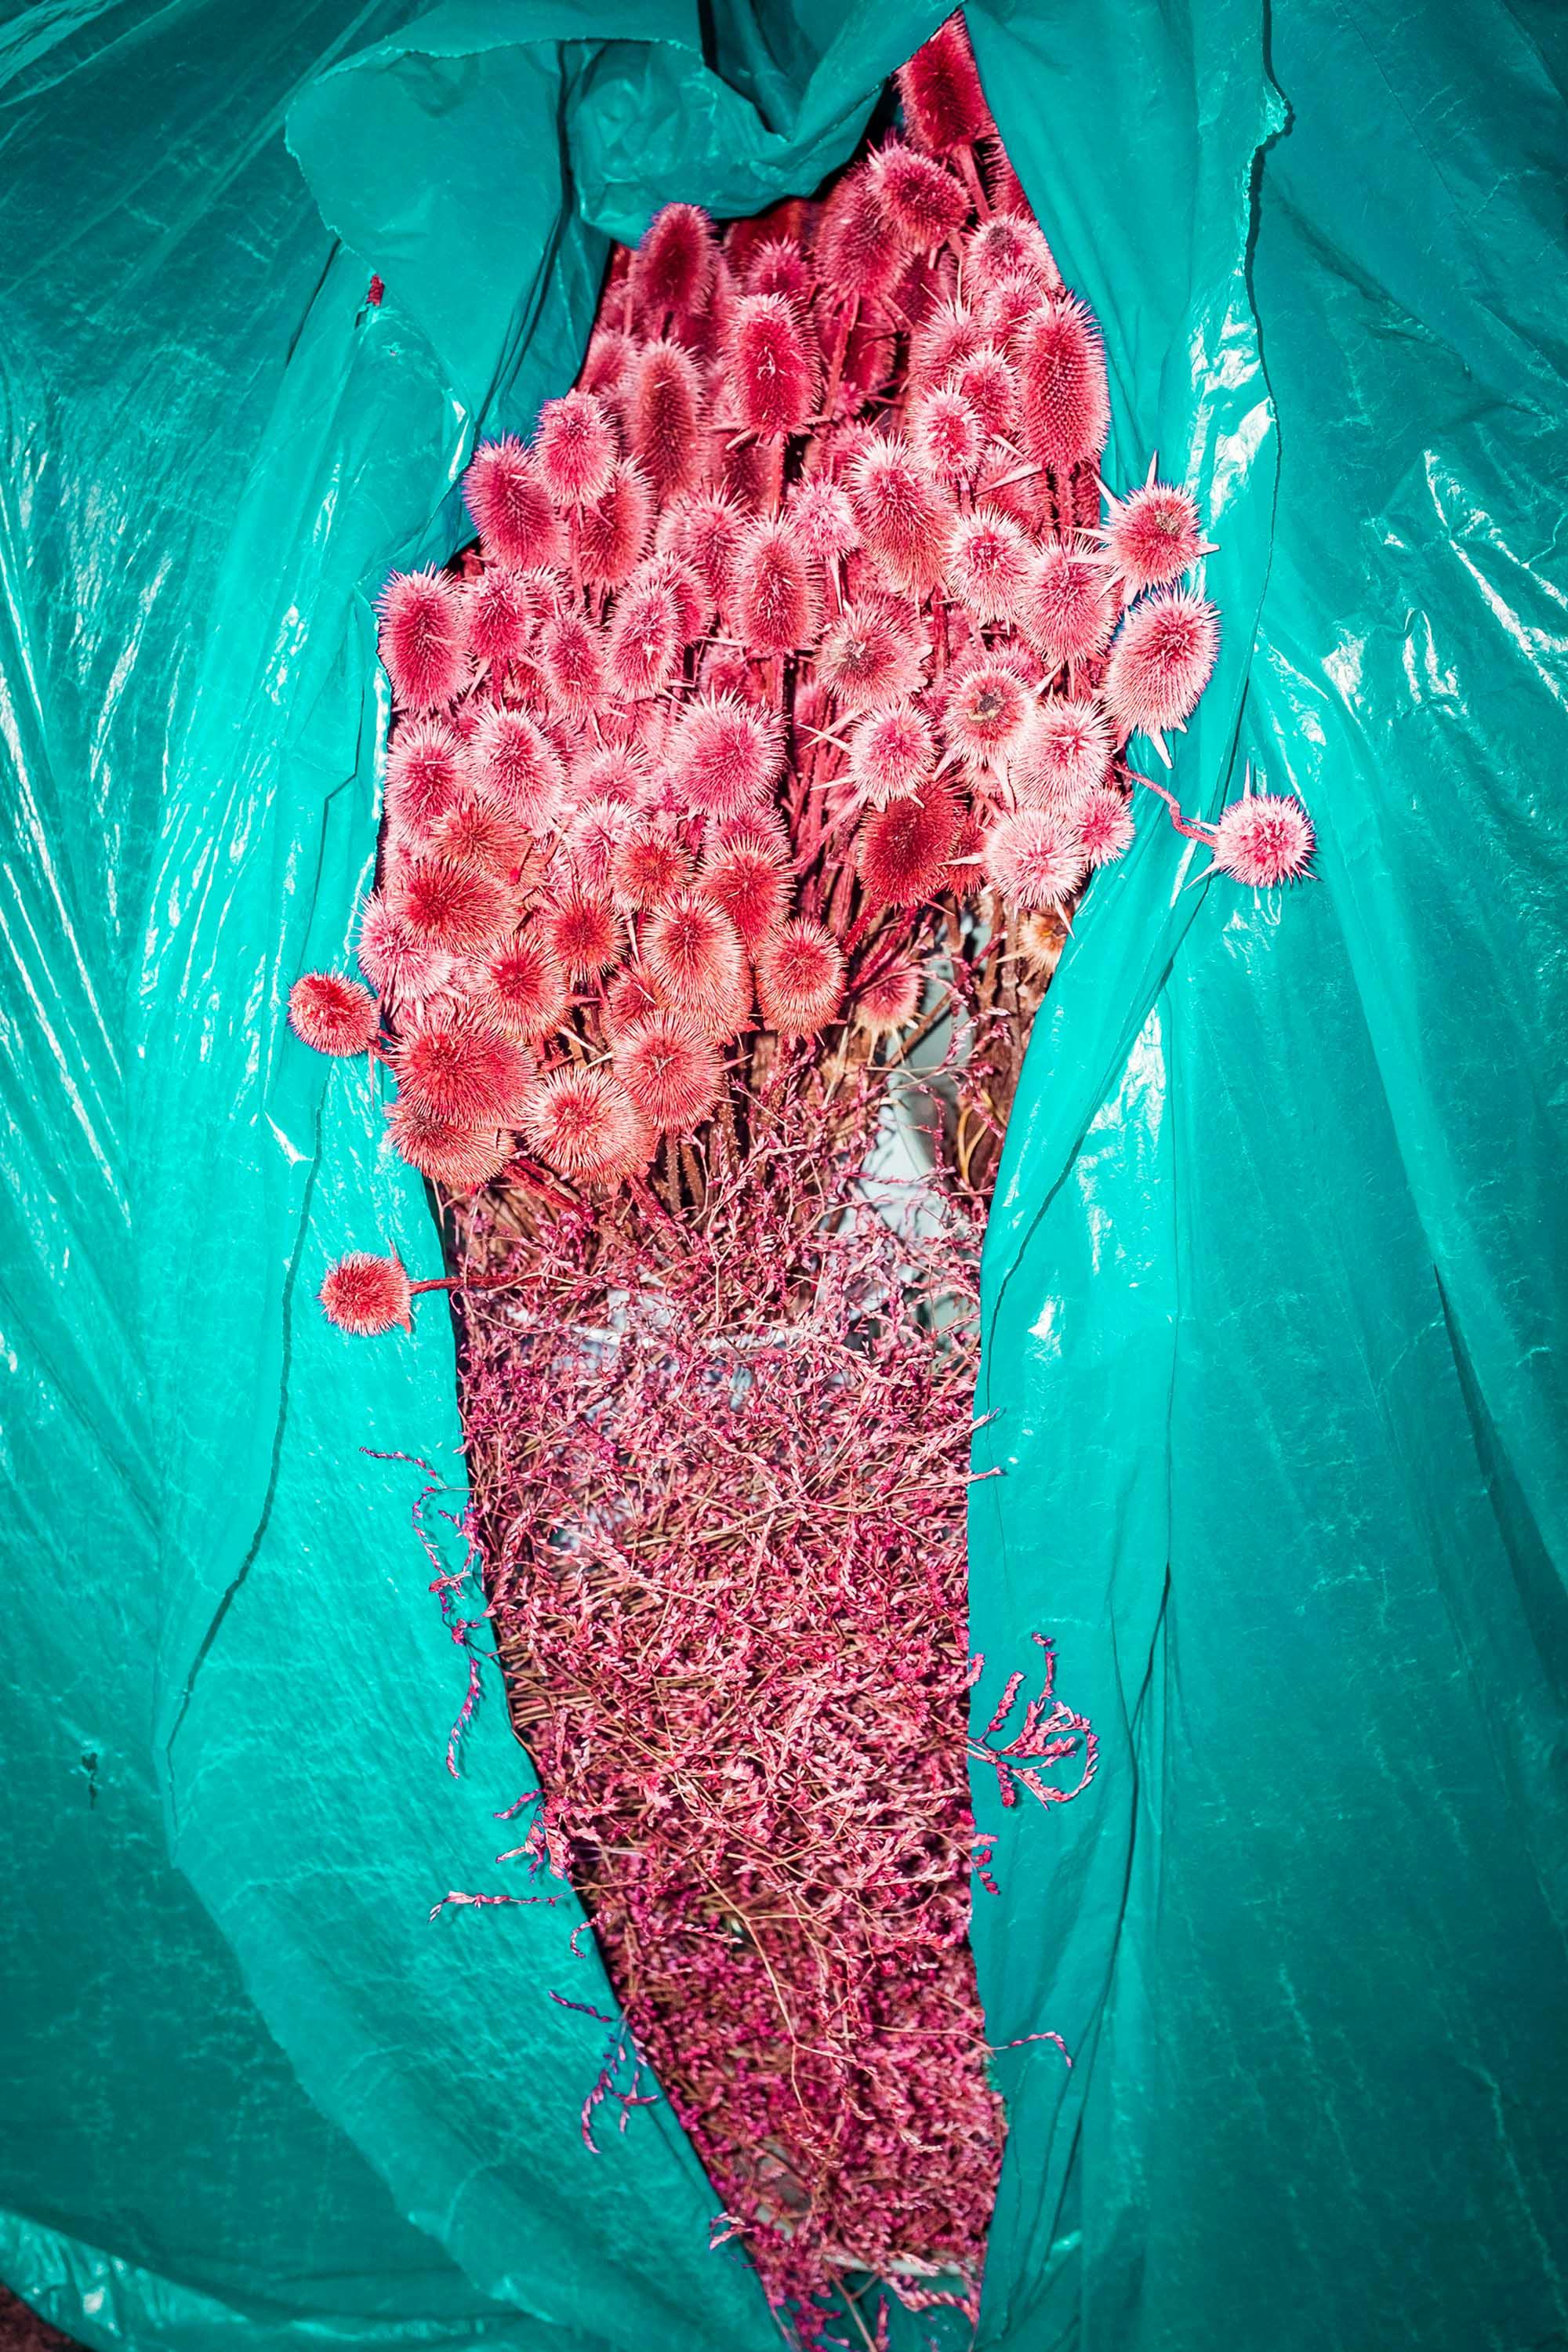 Photo of dried red flowers spilling out of a green plastic bag. © Oğulcan Arslan